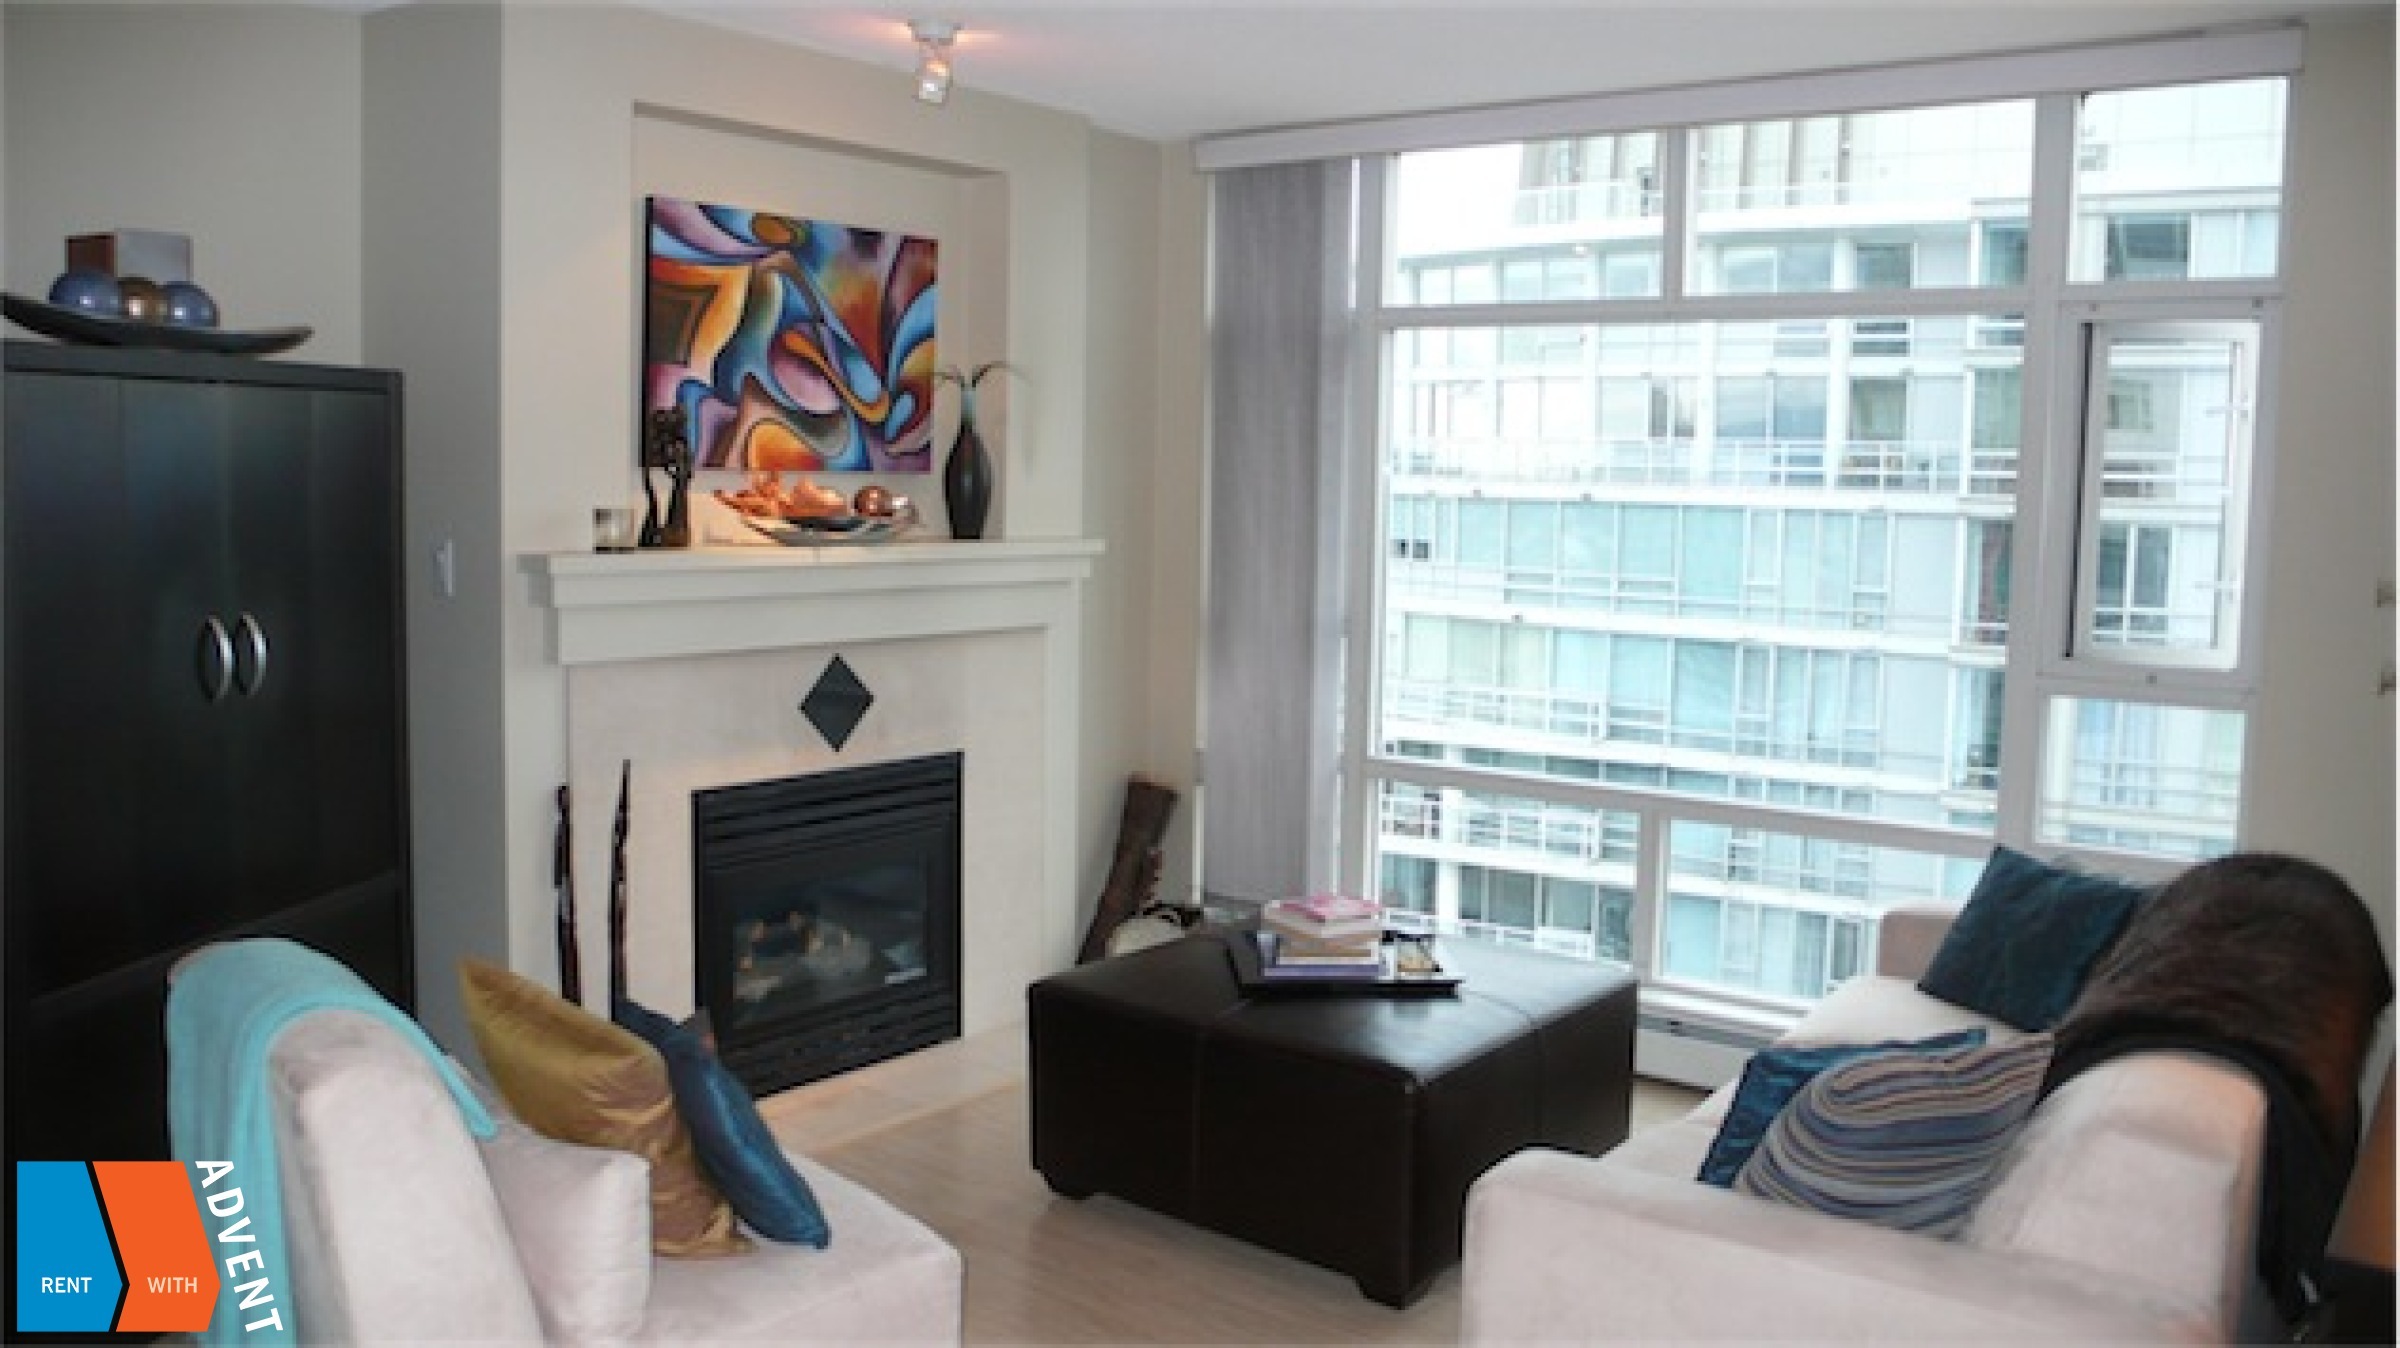 Unfurnished 1 Bedroom & Den Apartment Rental at Aquarius I in Yaletown, Vancouver. 3507 - 1199 Marinaside Crescent, Vancouver, BC, Canada.